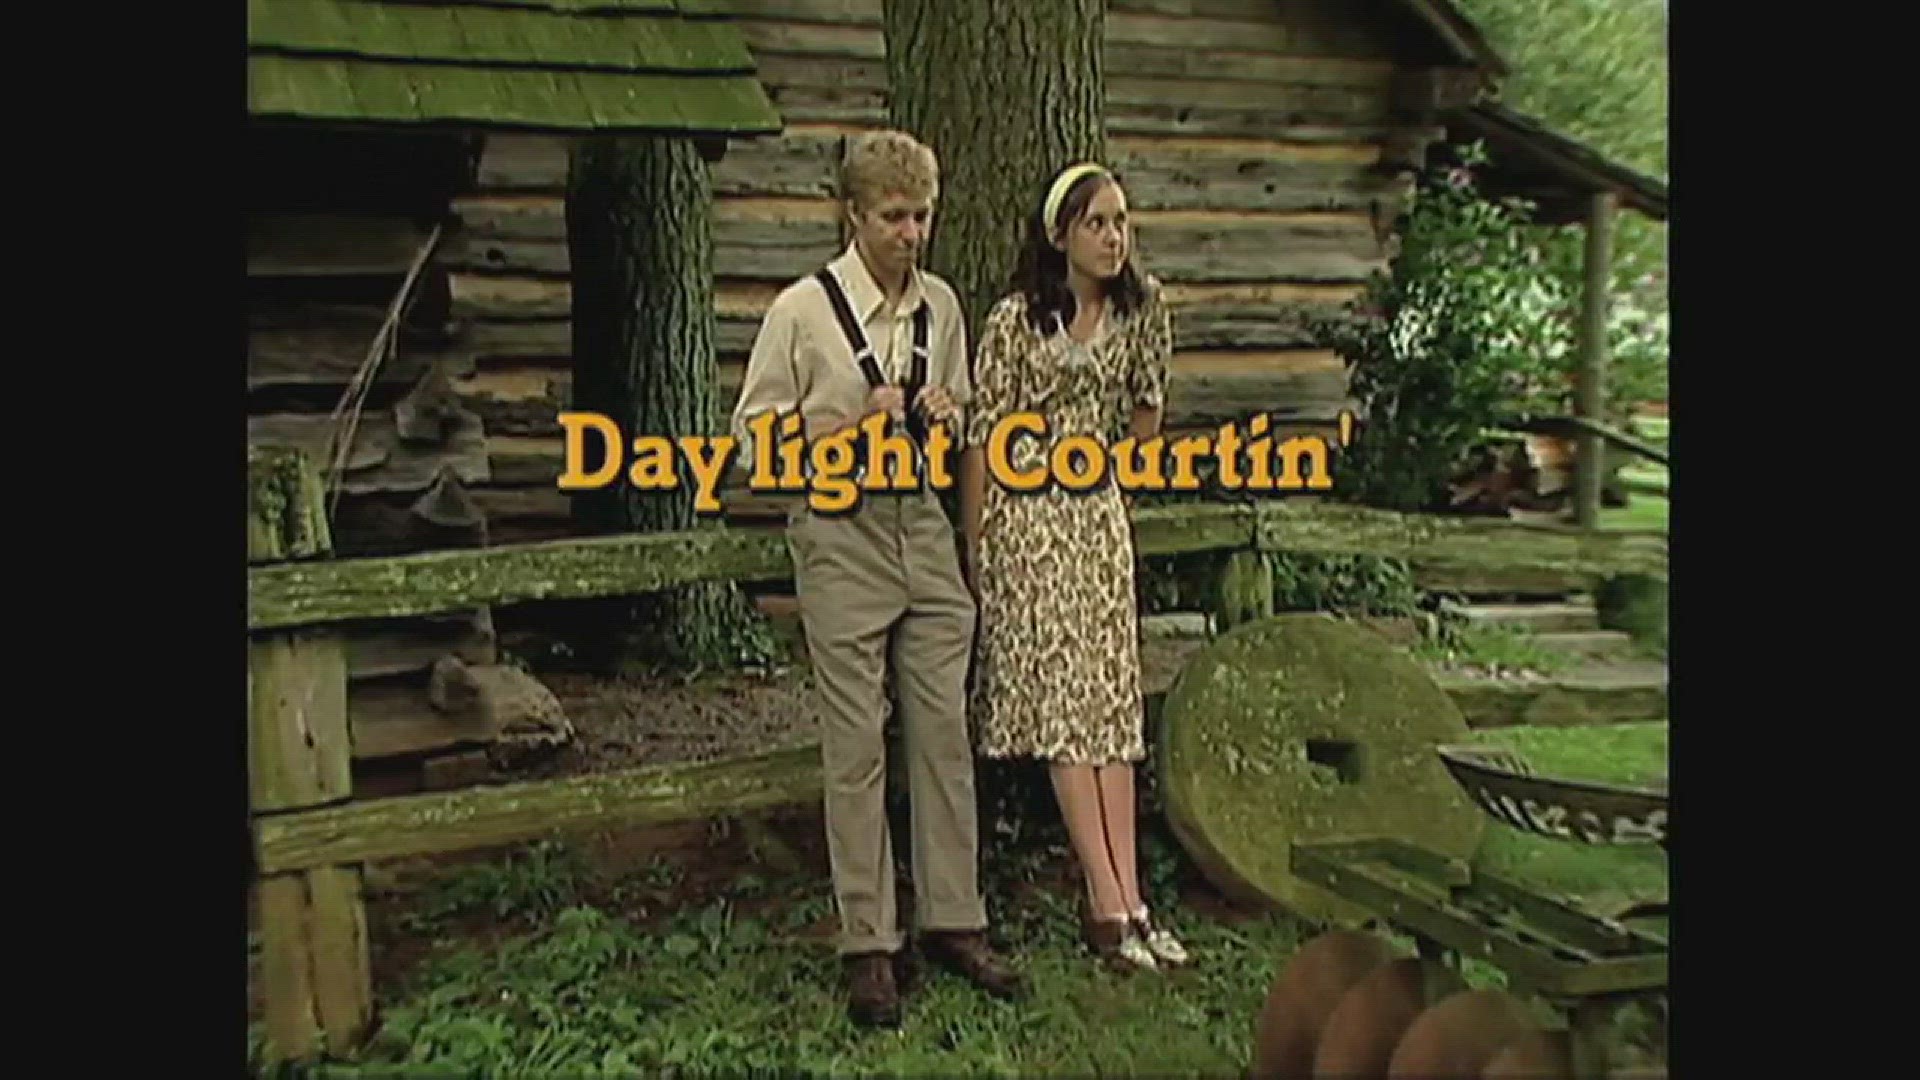 Courtin� could be, as Connie Boling tells it, a stressful endeavor made all the more confounding in the daytime. He relates his first attempt at daylight courtin� and what results is a hilarious and unforgettable adventure.